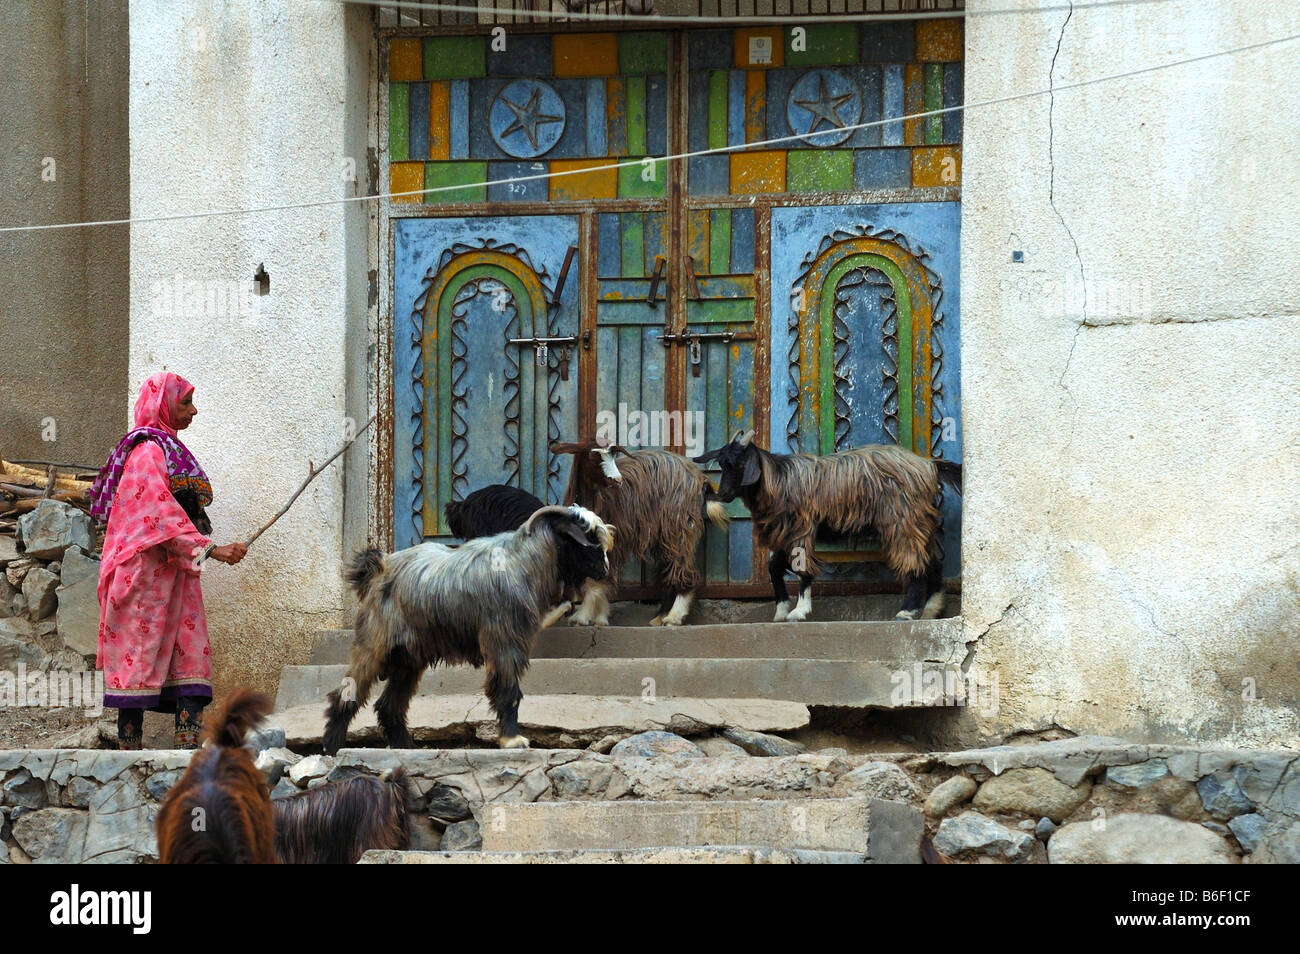 Omani woman with goats in front of the traditional metal doors of an Omani house, Nakhl, Sultanate of Oman, Middle East Stock Photo